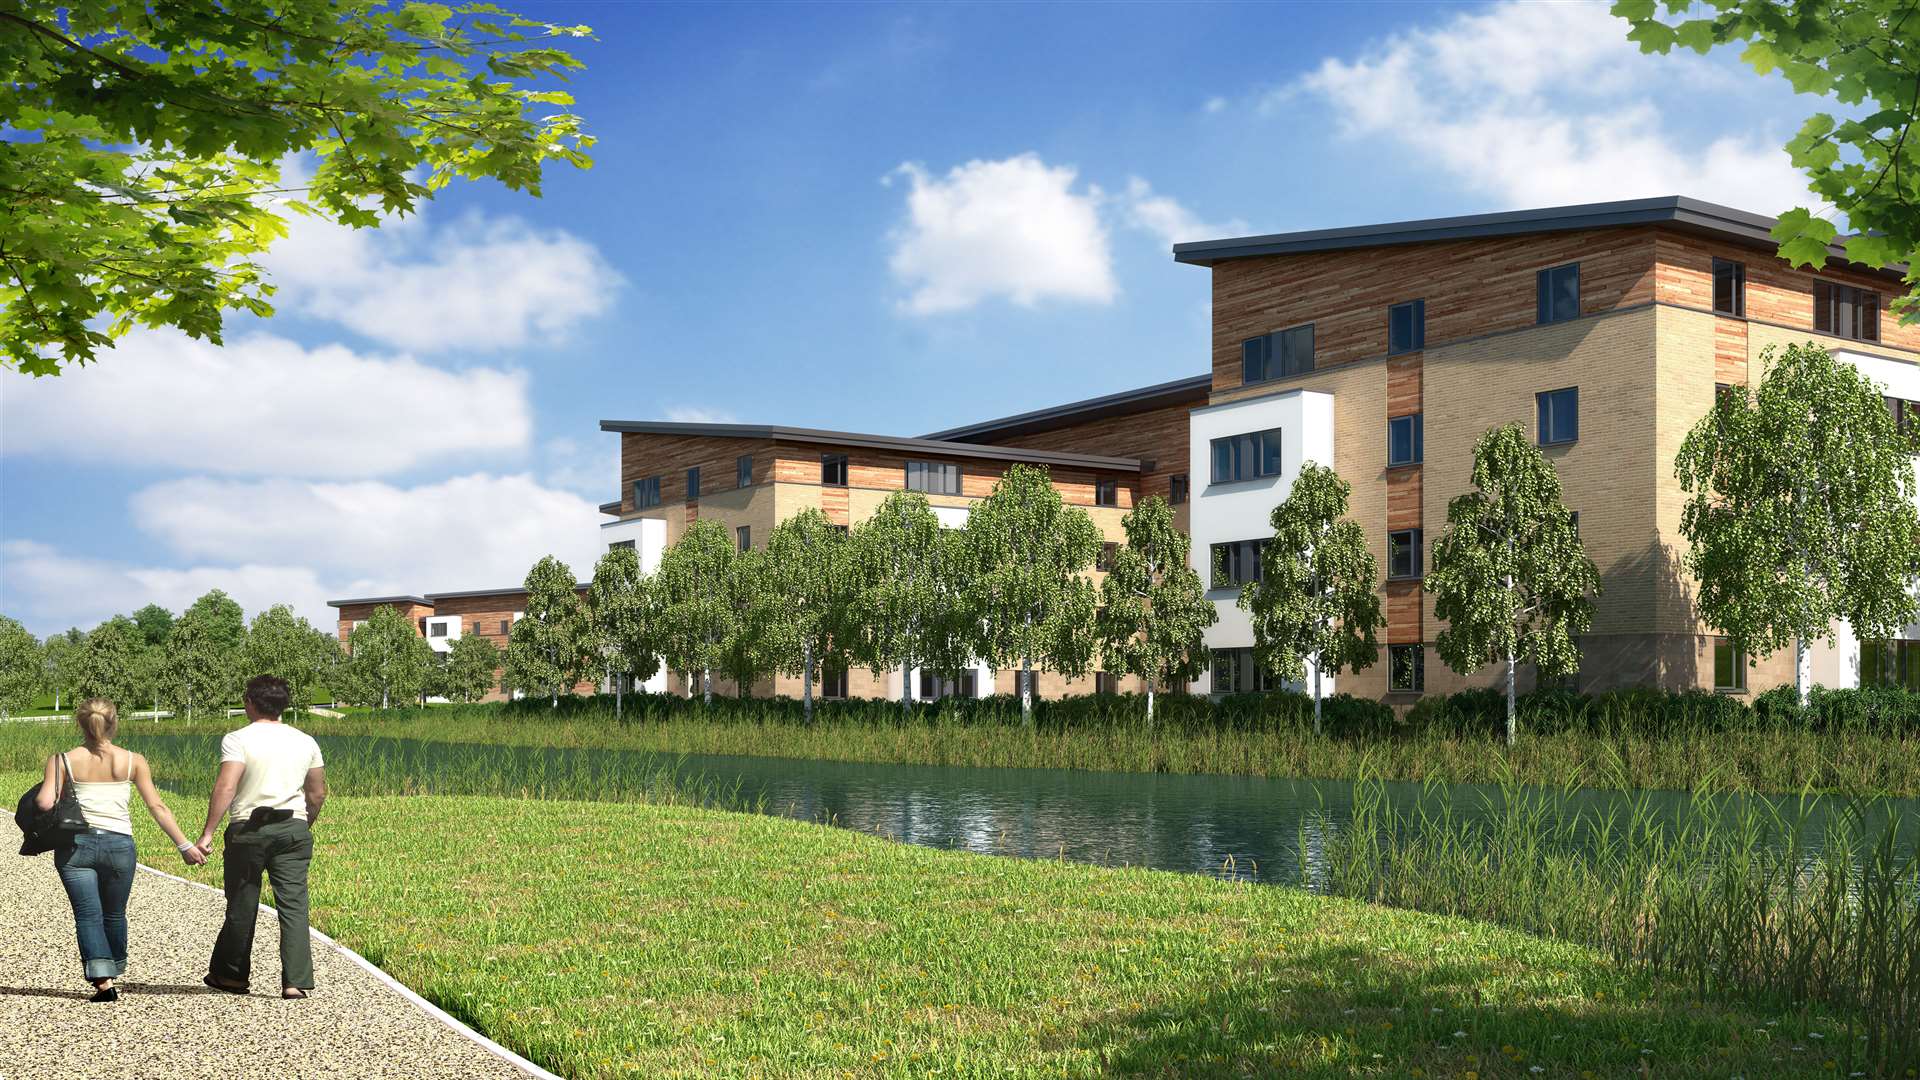 Maidstone council set to reapprove Kent Medical Campus plans1920 x 1080